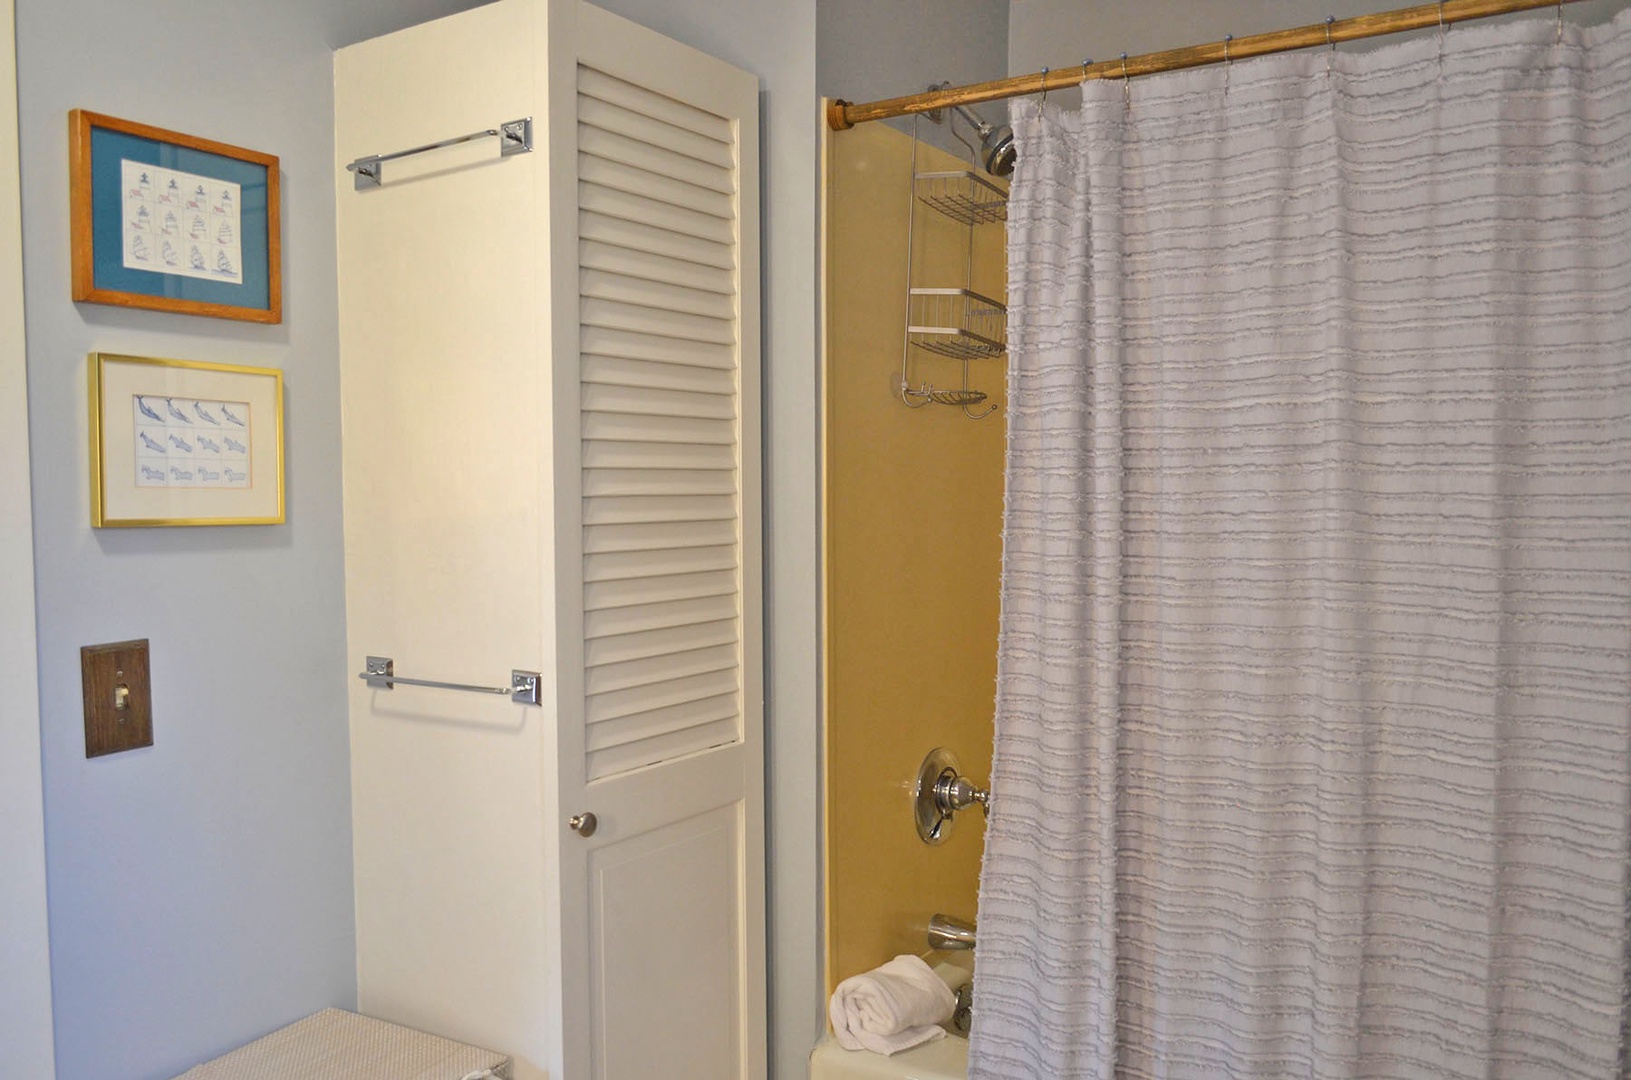 The linen/storage closet in the upstairs bathroom.